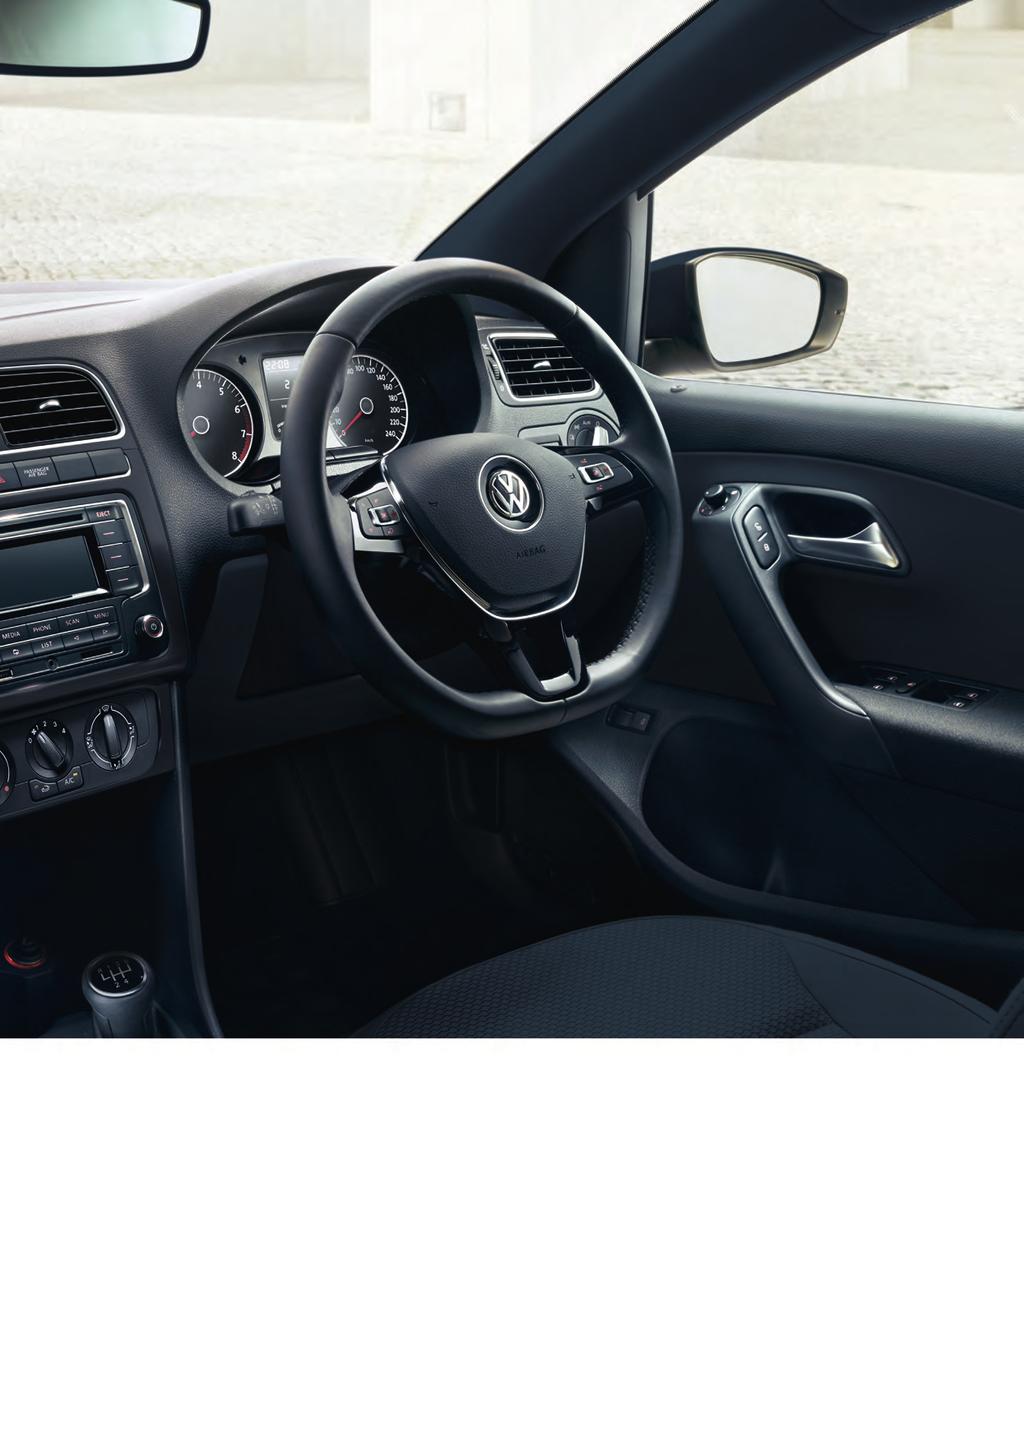 Driving pleasure, every day. The Polo Sedan comes with an economical TDI engine option.